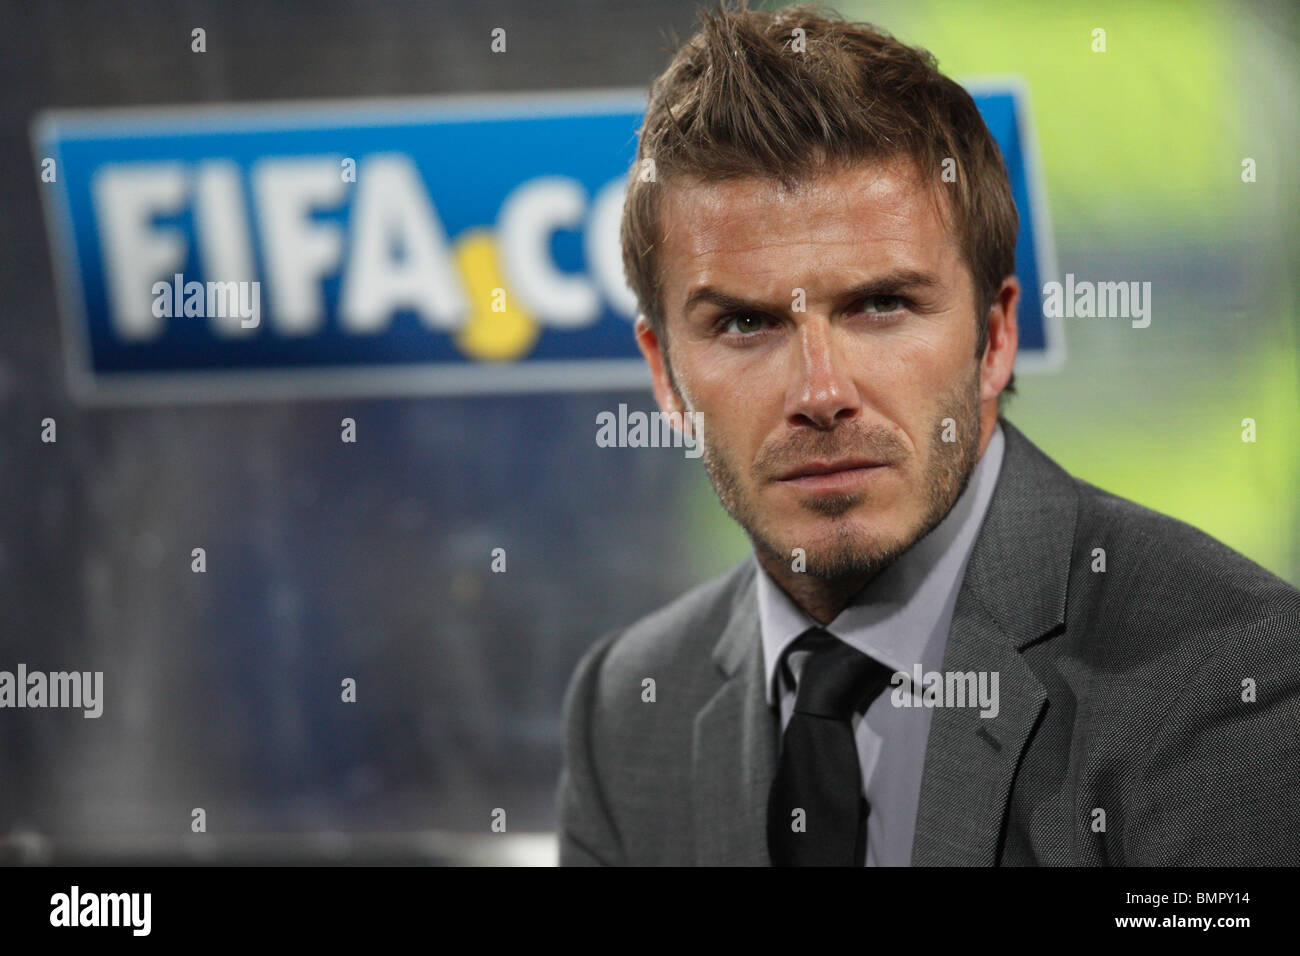 David Beckham of England on the team bench prior to the start of a 2010 FIFA World Cup football match against the United States. Stock Photo